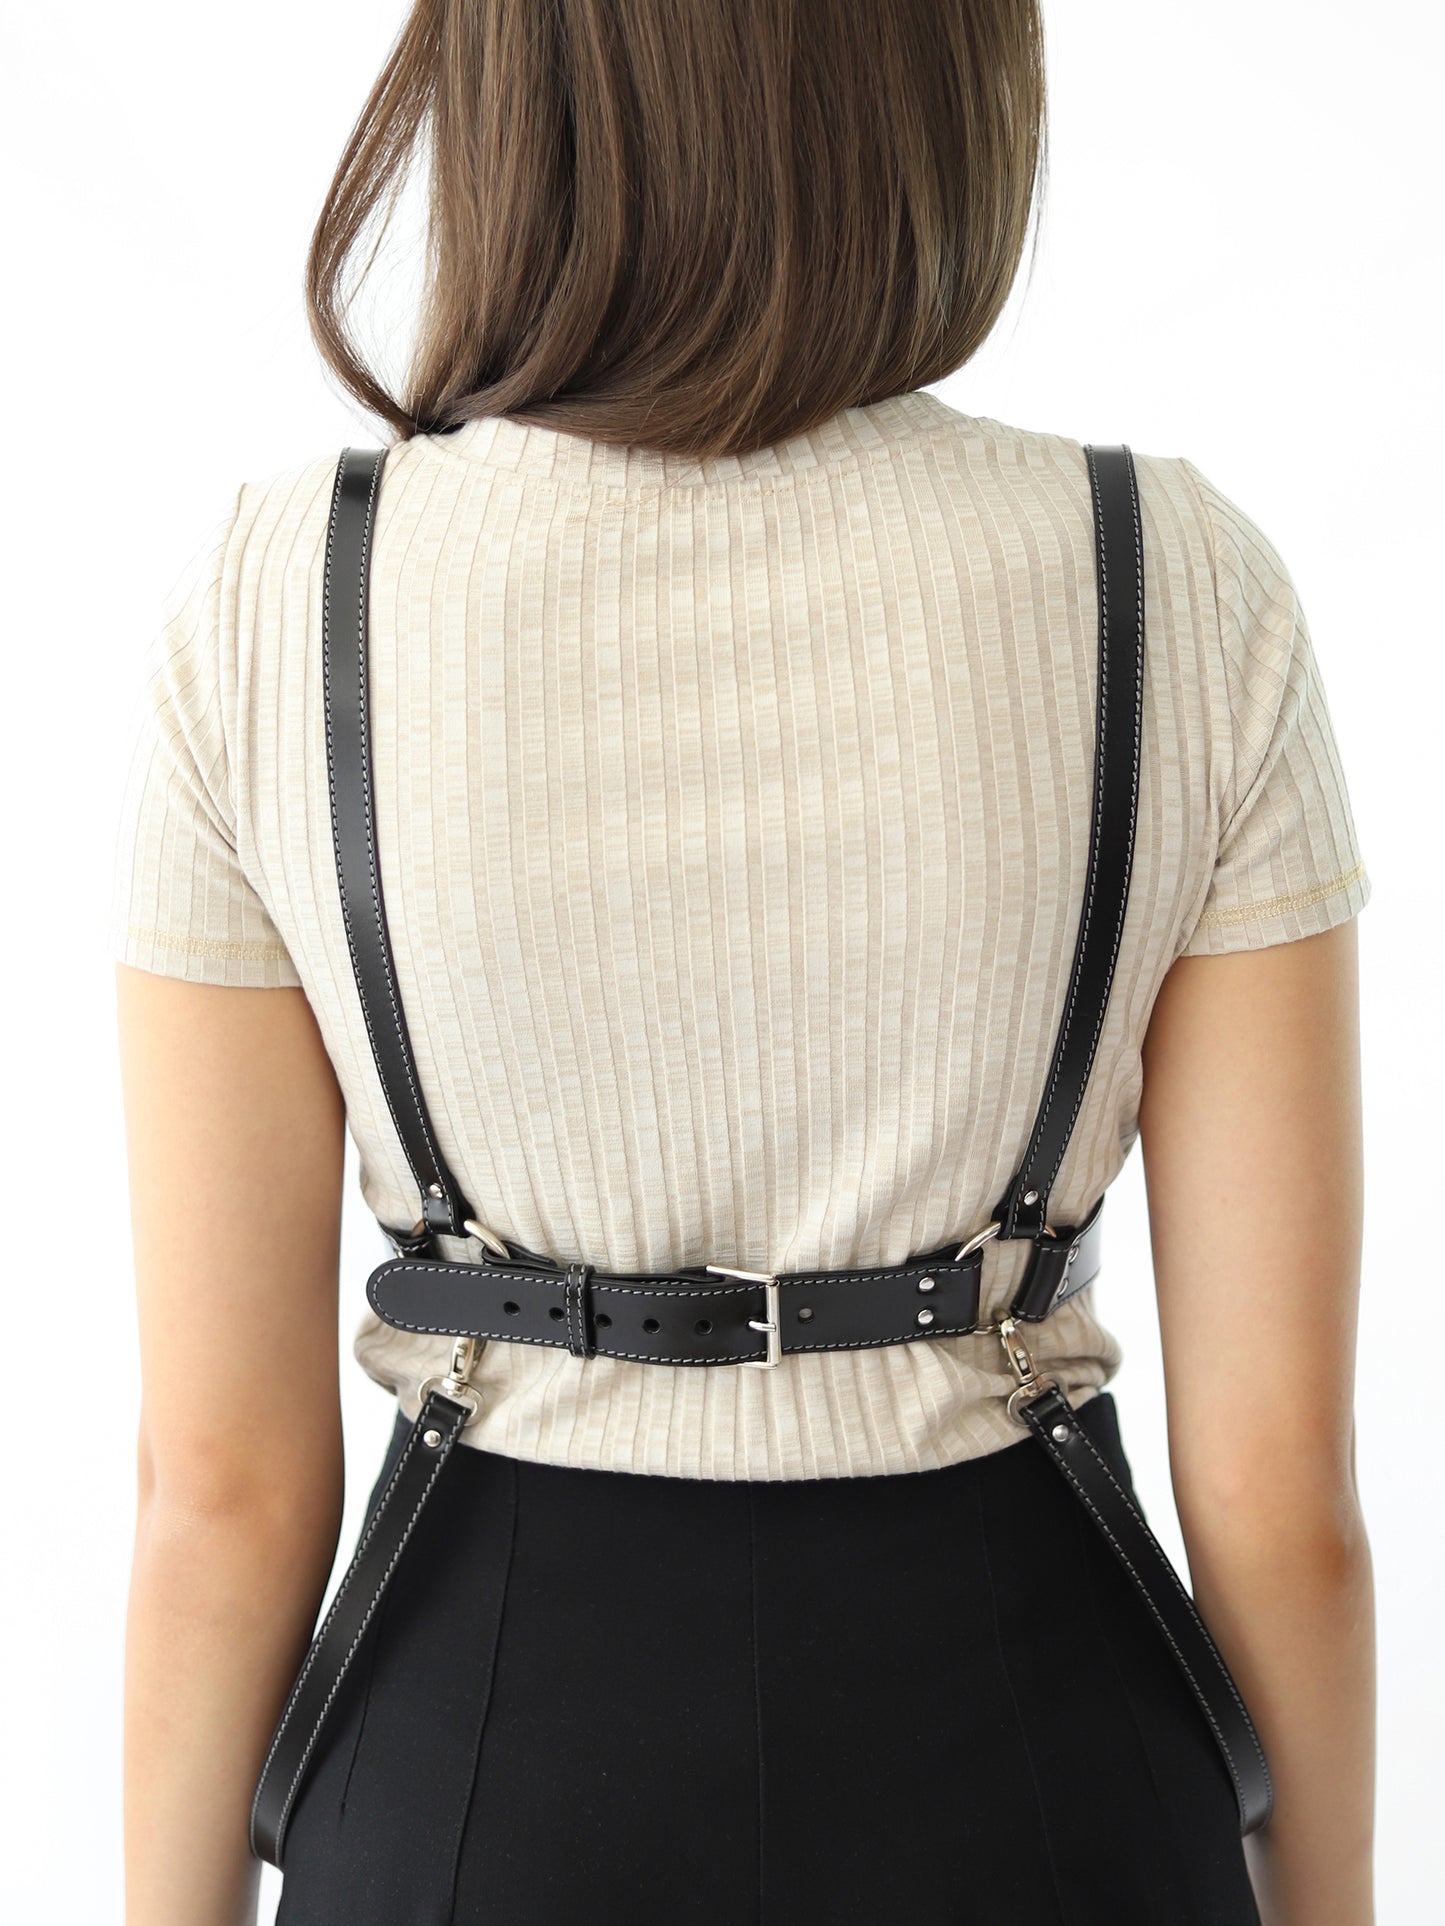 Back view of the underbust leather harness.